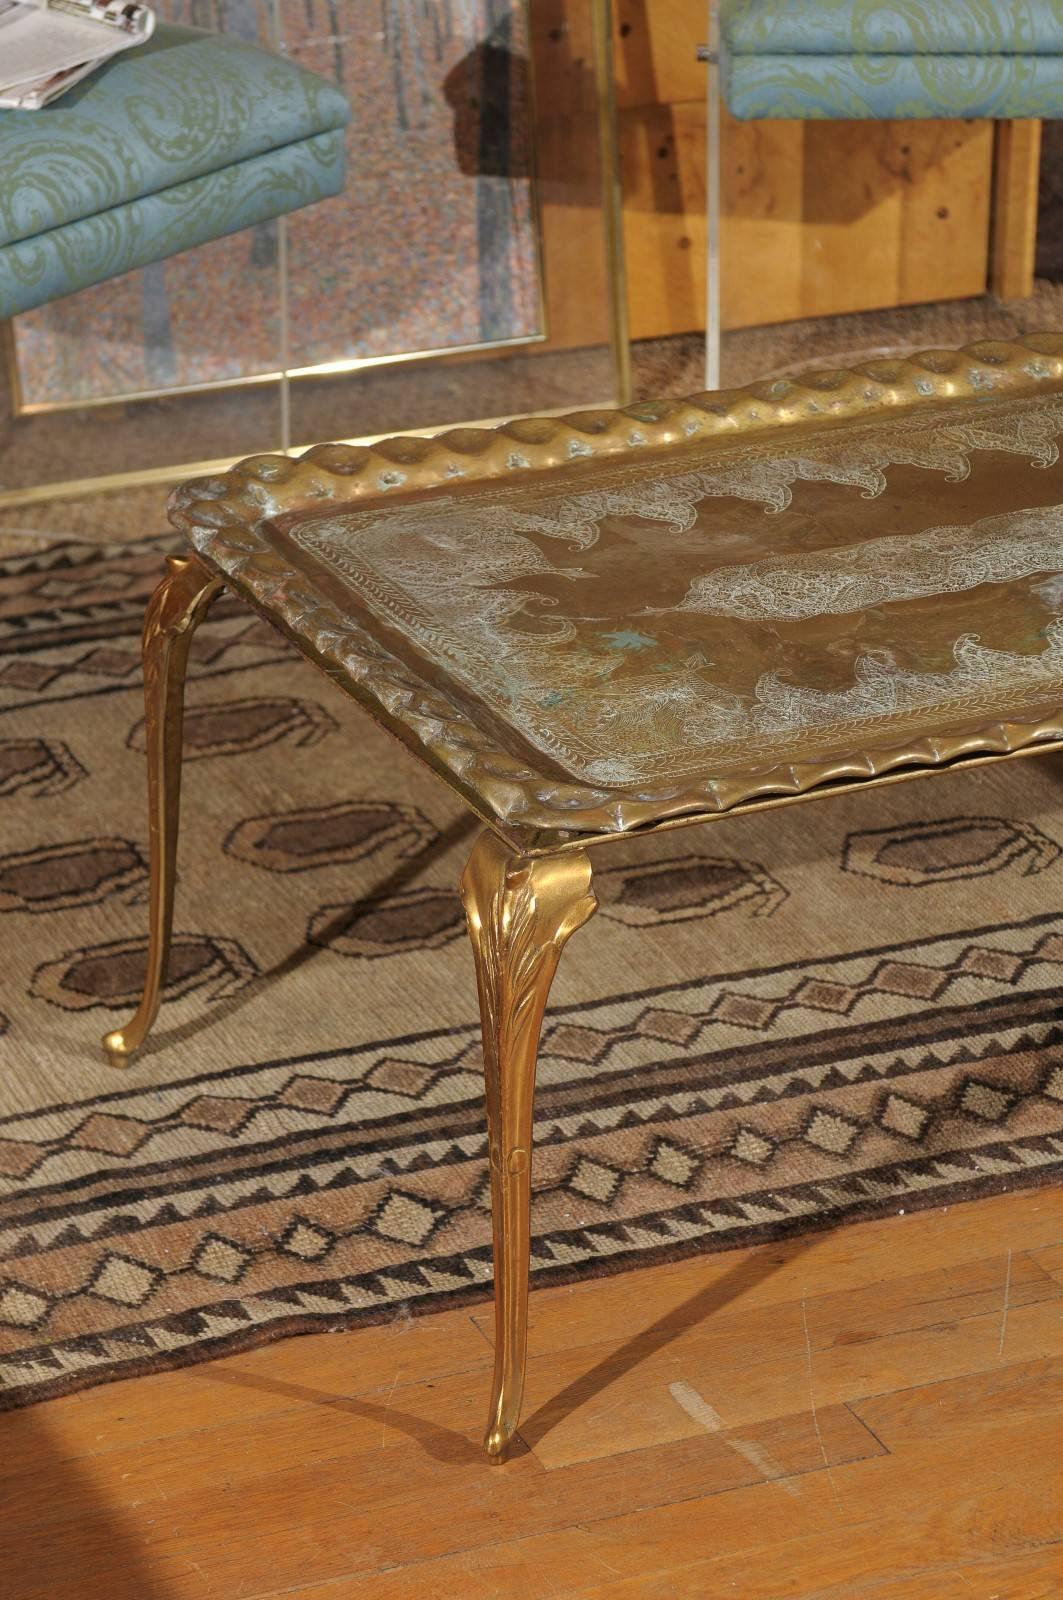 Vintage Etched and Hammered Brass Tray Table 1